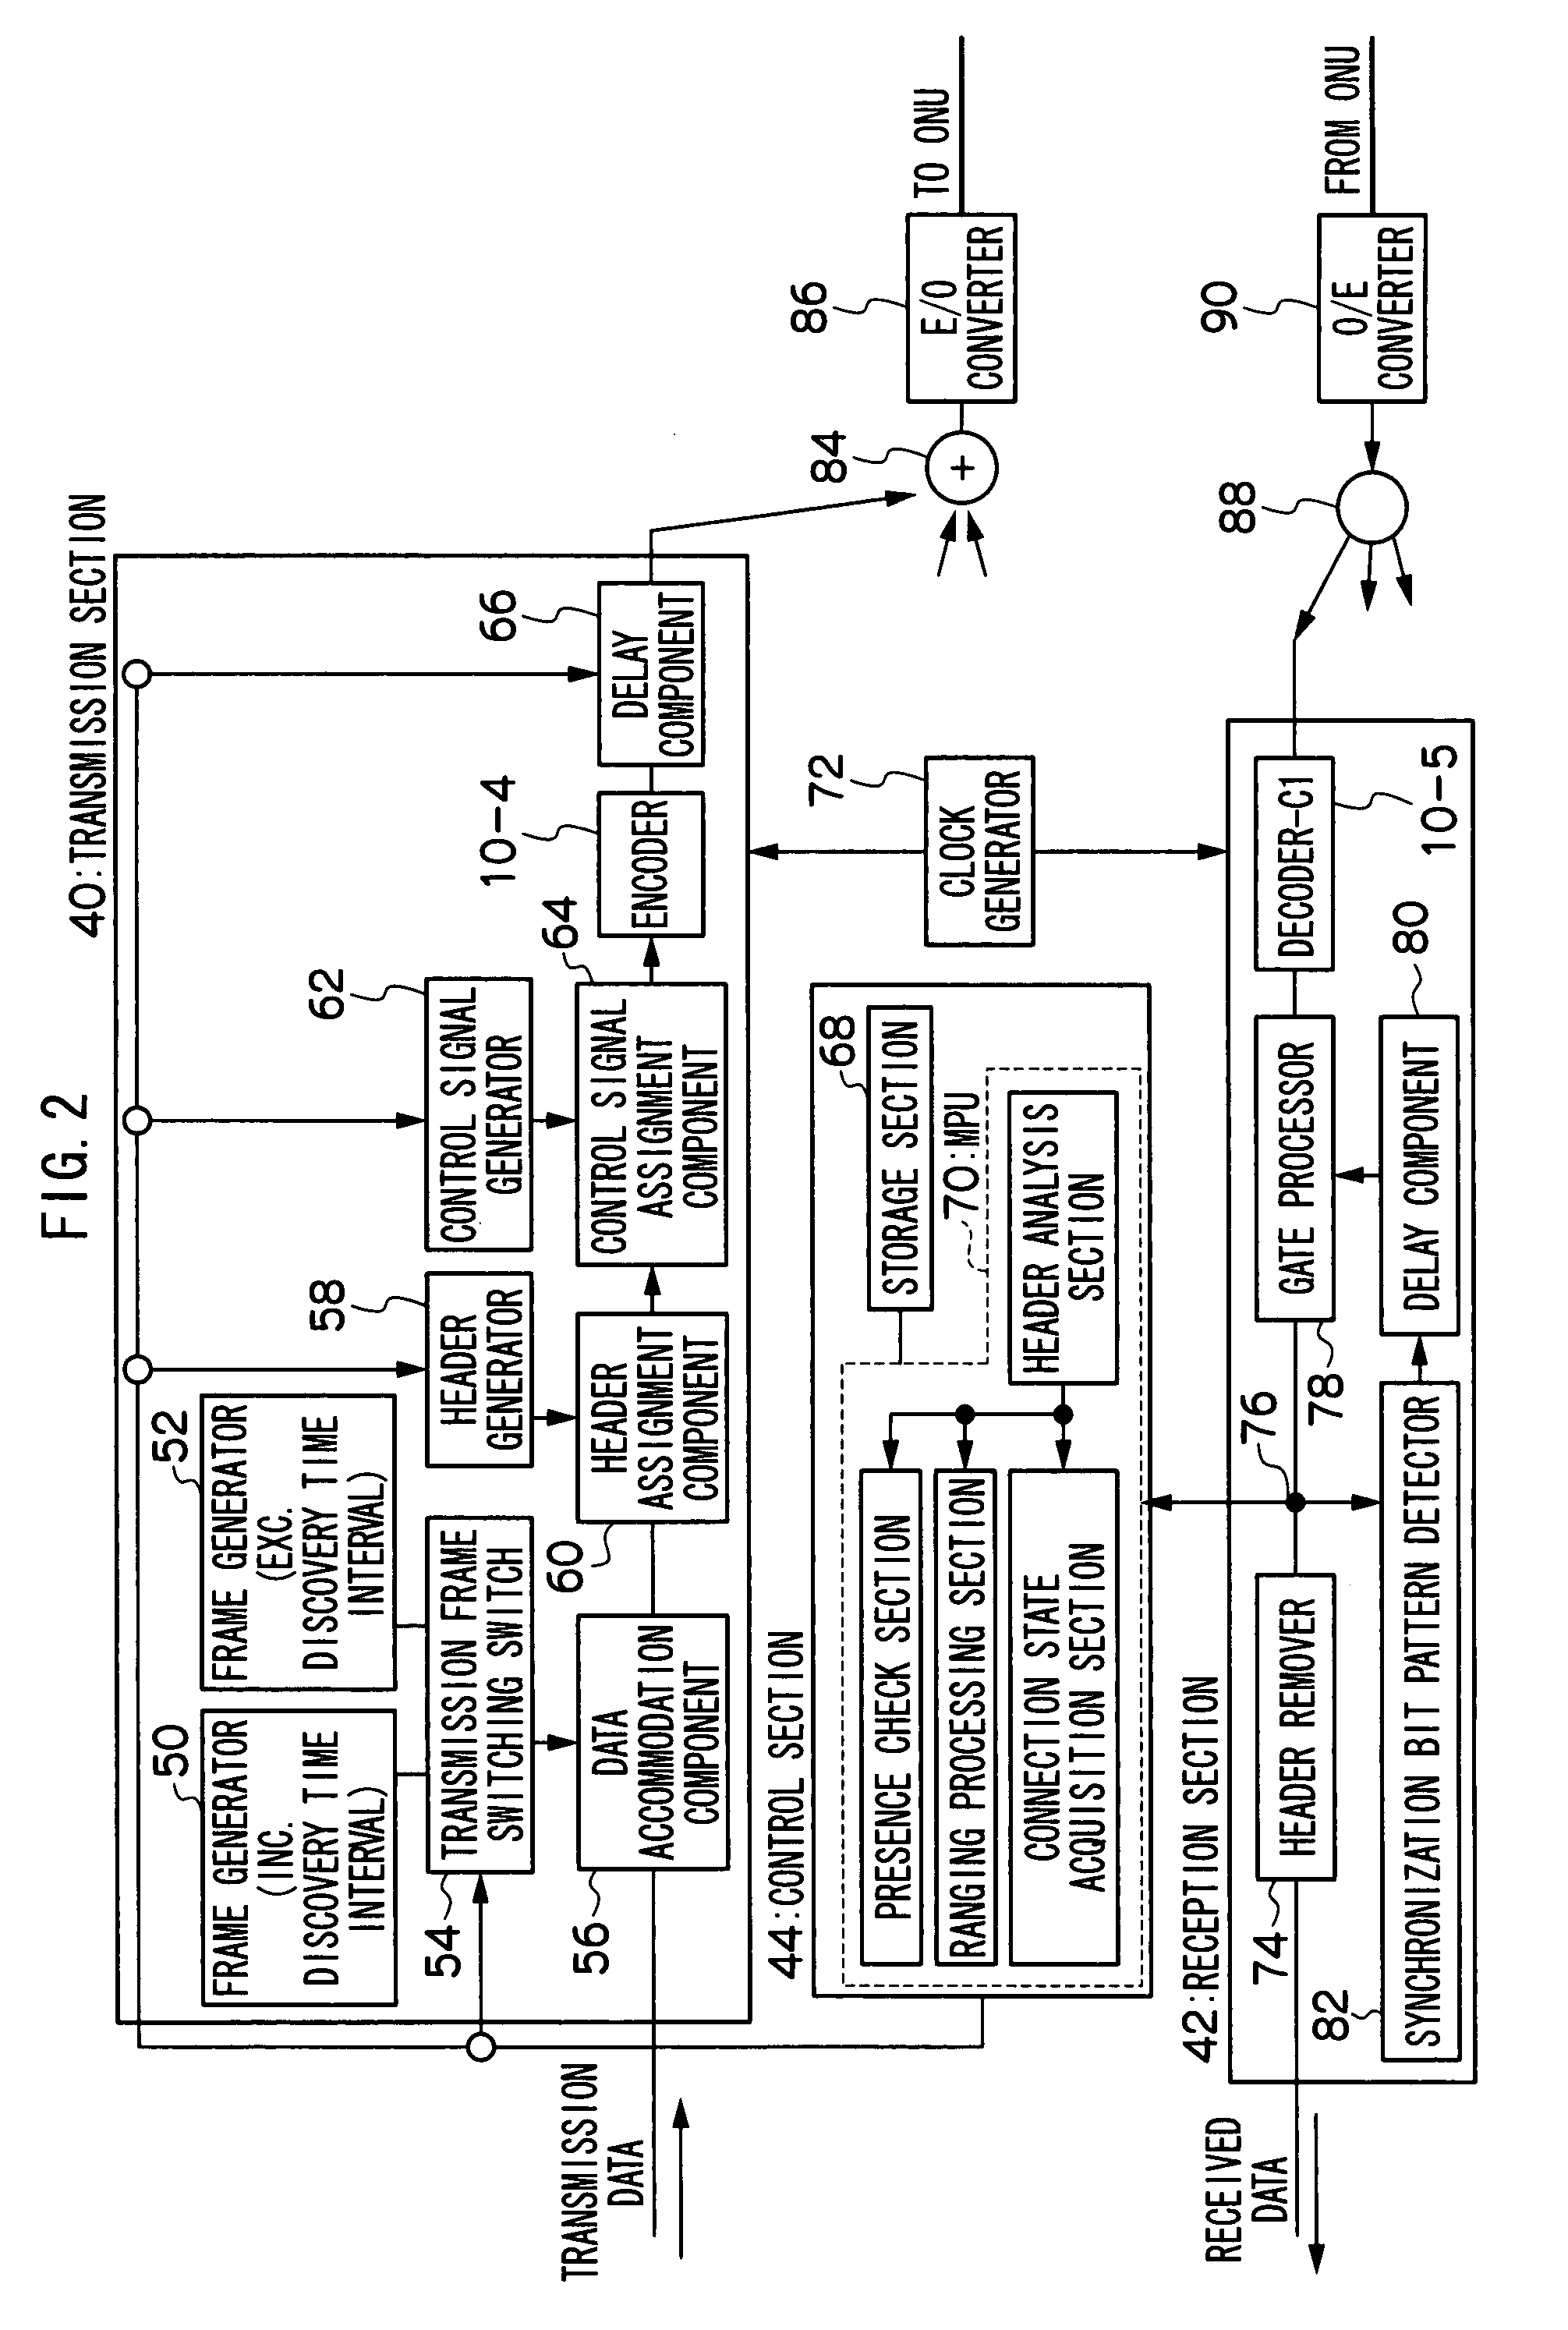 Synchronized code division multiplexing communication method and synchronized code division multiplexing communication system